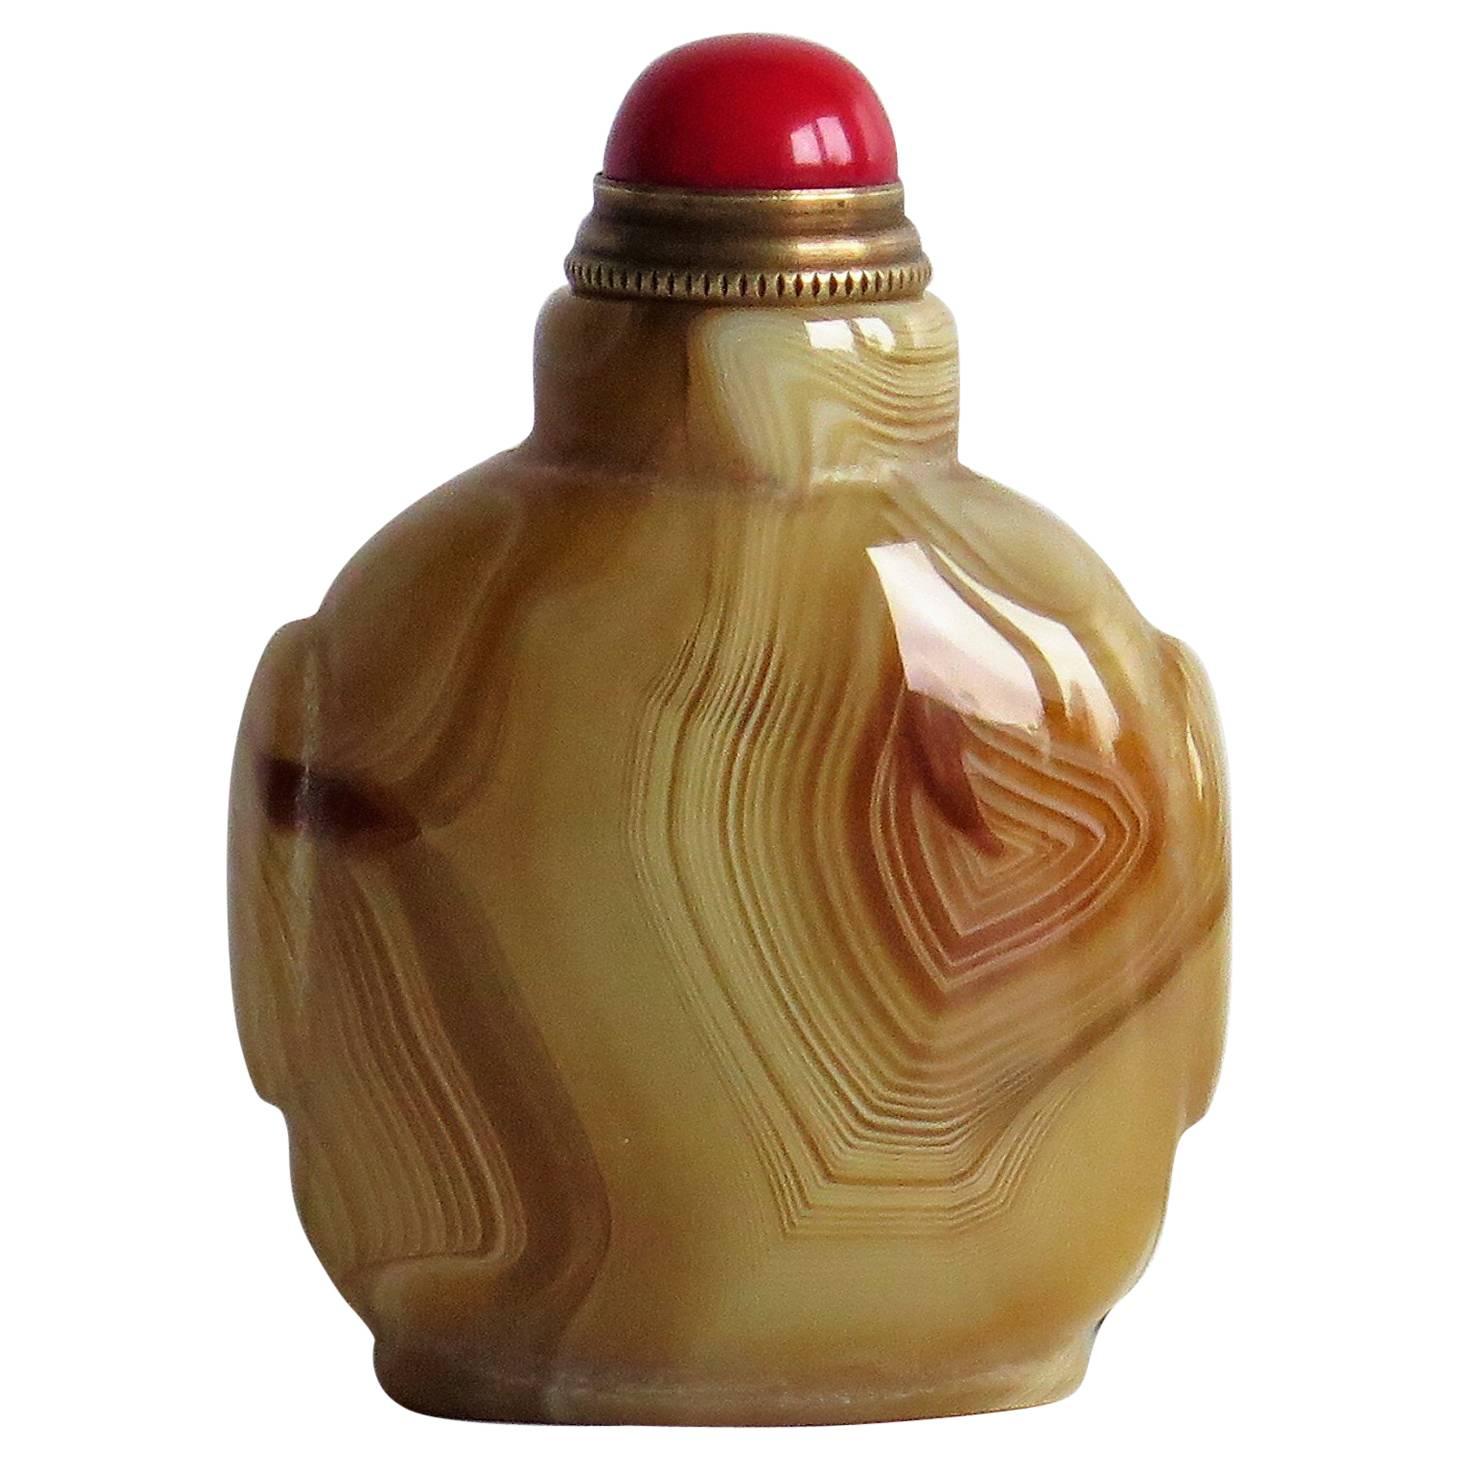 Chinese Snuff Bottle Natural Agate Red Ceramic Stopper and Spoon, circa 1930